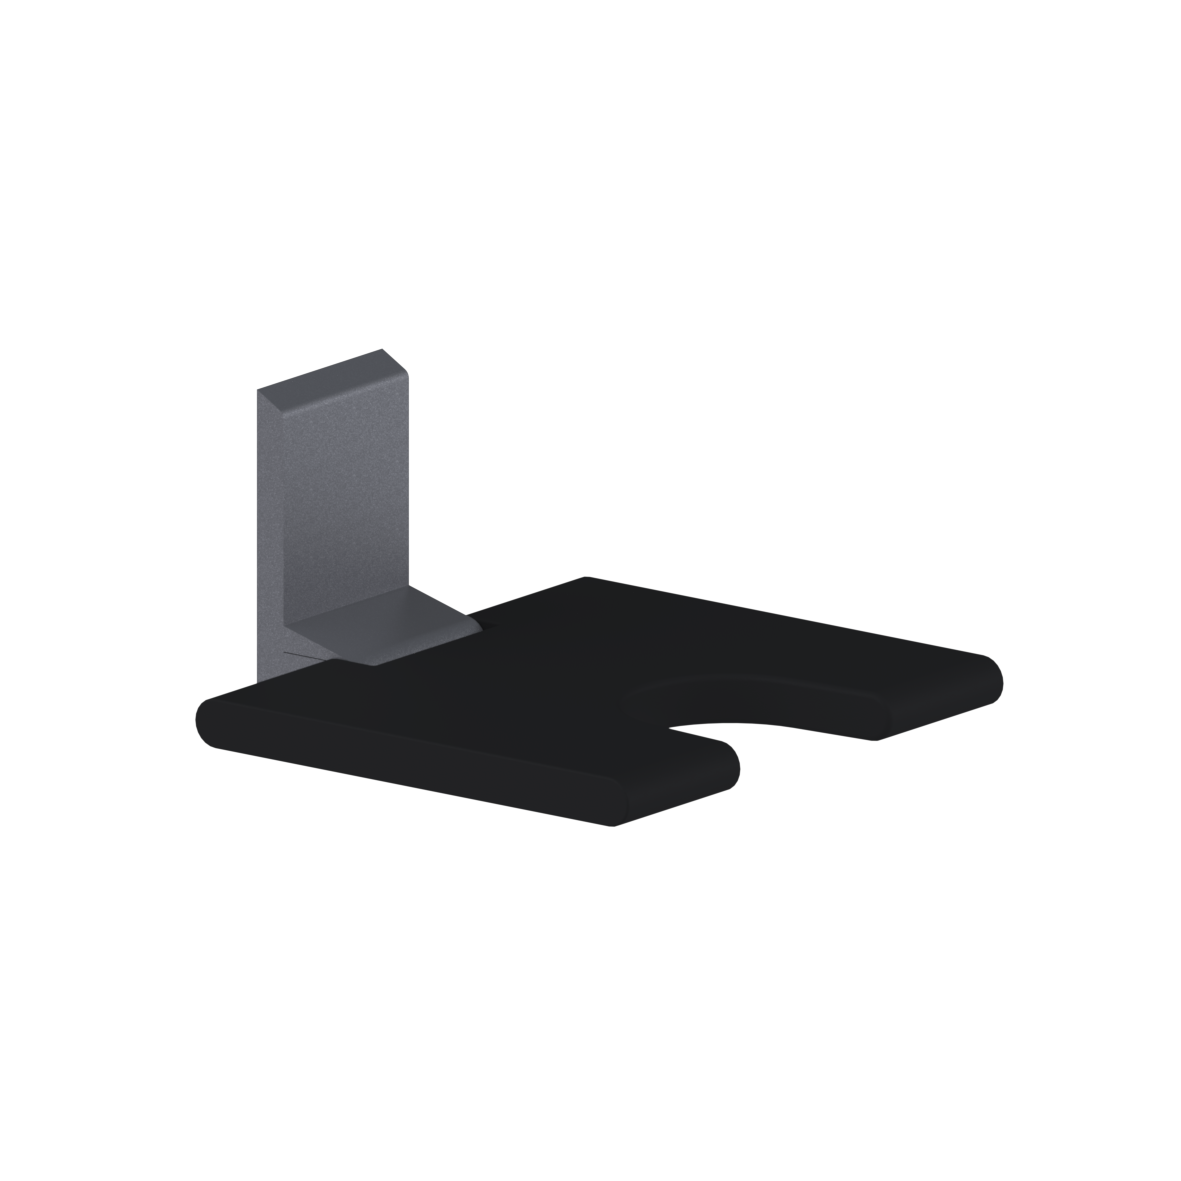 Cavere Care Lift-up shower seat vario, with base plate, with hygiene recess, 462 x 450 x 230 mm, Cavere Metallic anthracite, padded, colour black